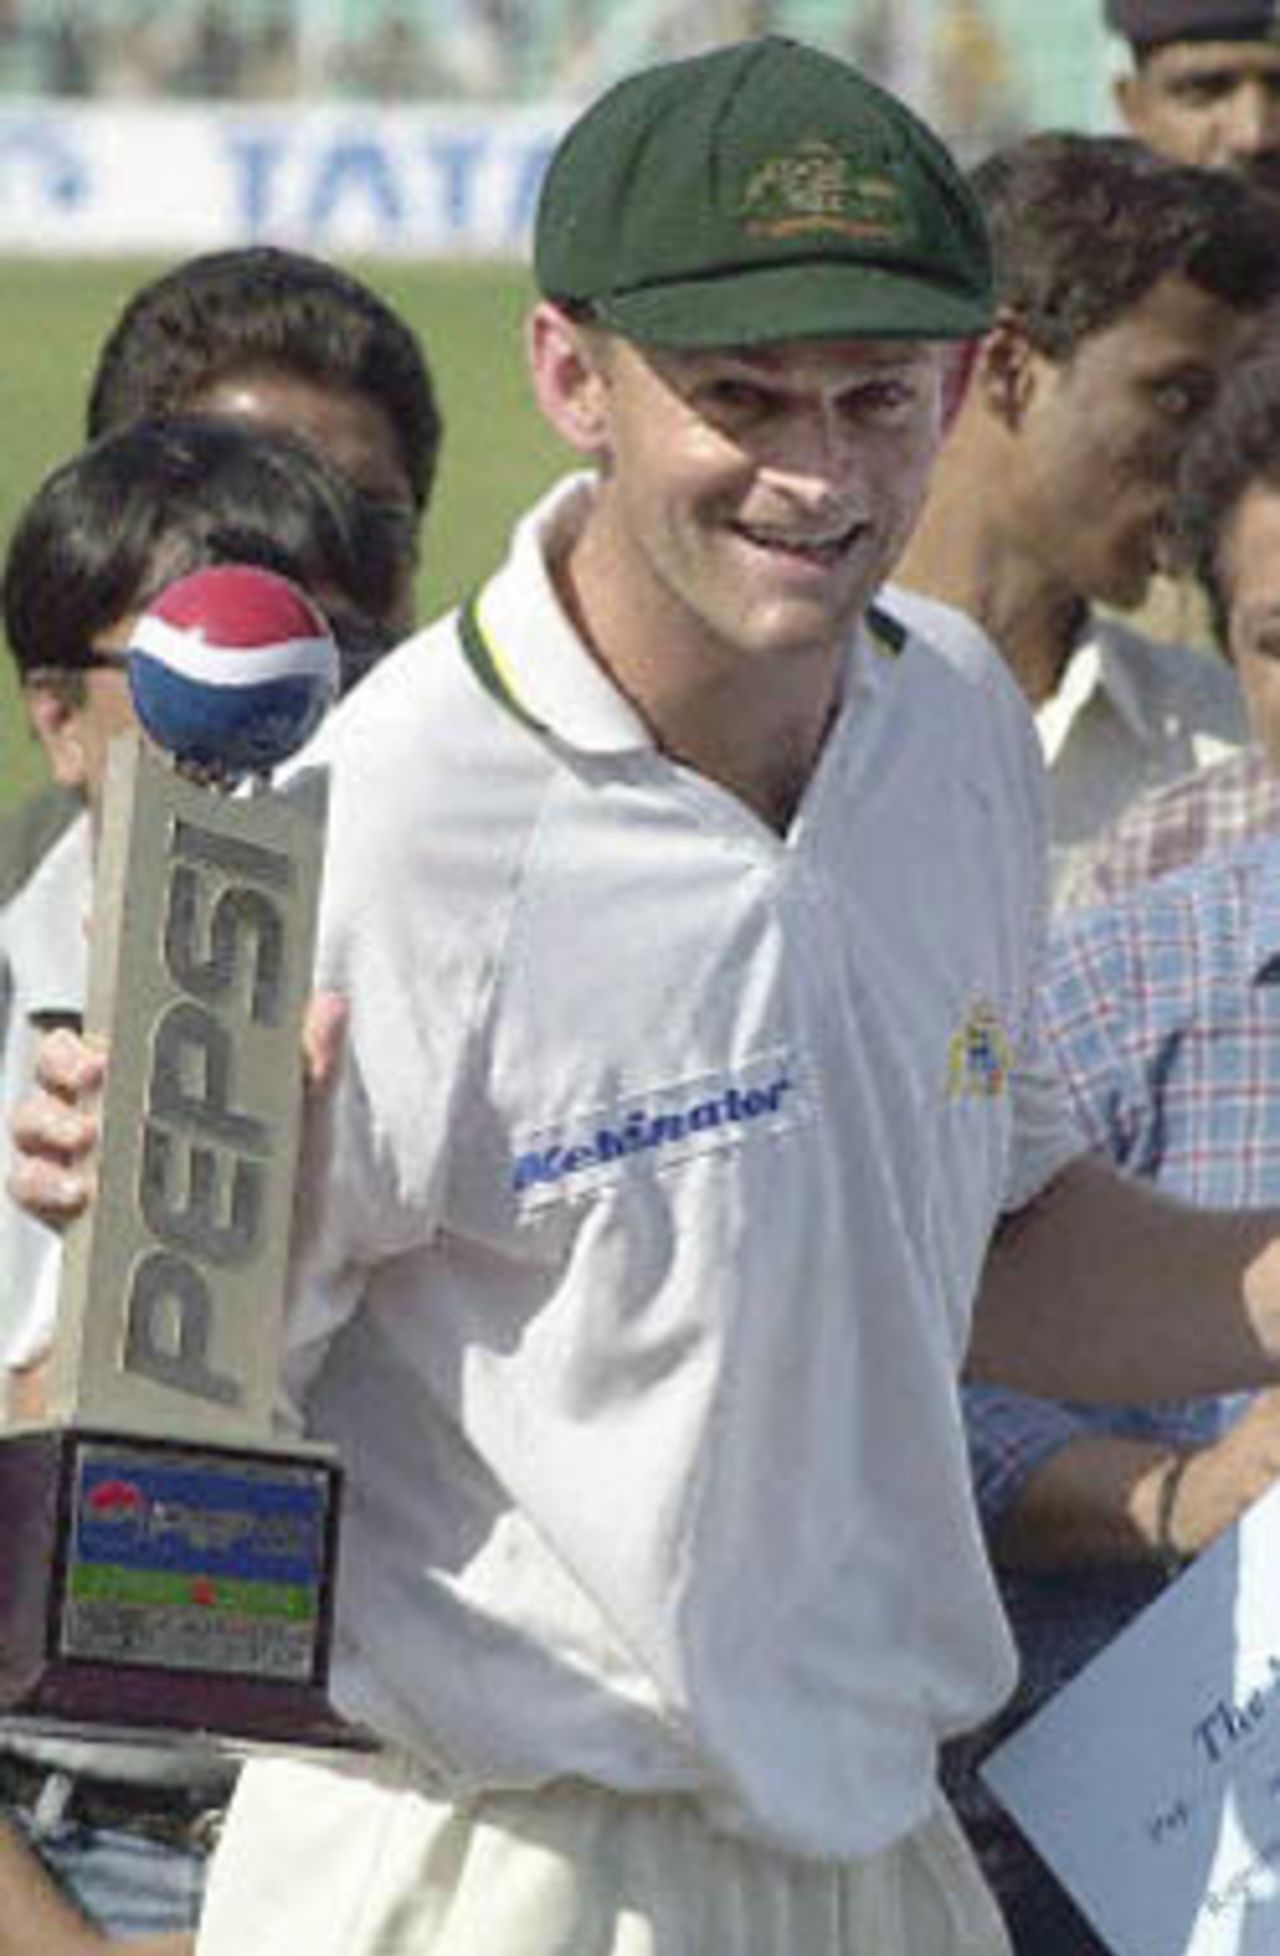 Australian player is all smiles while displaying his Man of the Match trophy at the end of the first test match on the third day between India and Australia at the Wankhade Stadium in Bombay 01 March 2001. Australia beat India by 10 wickets.